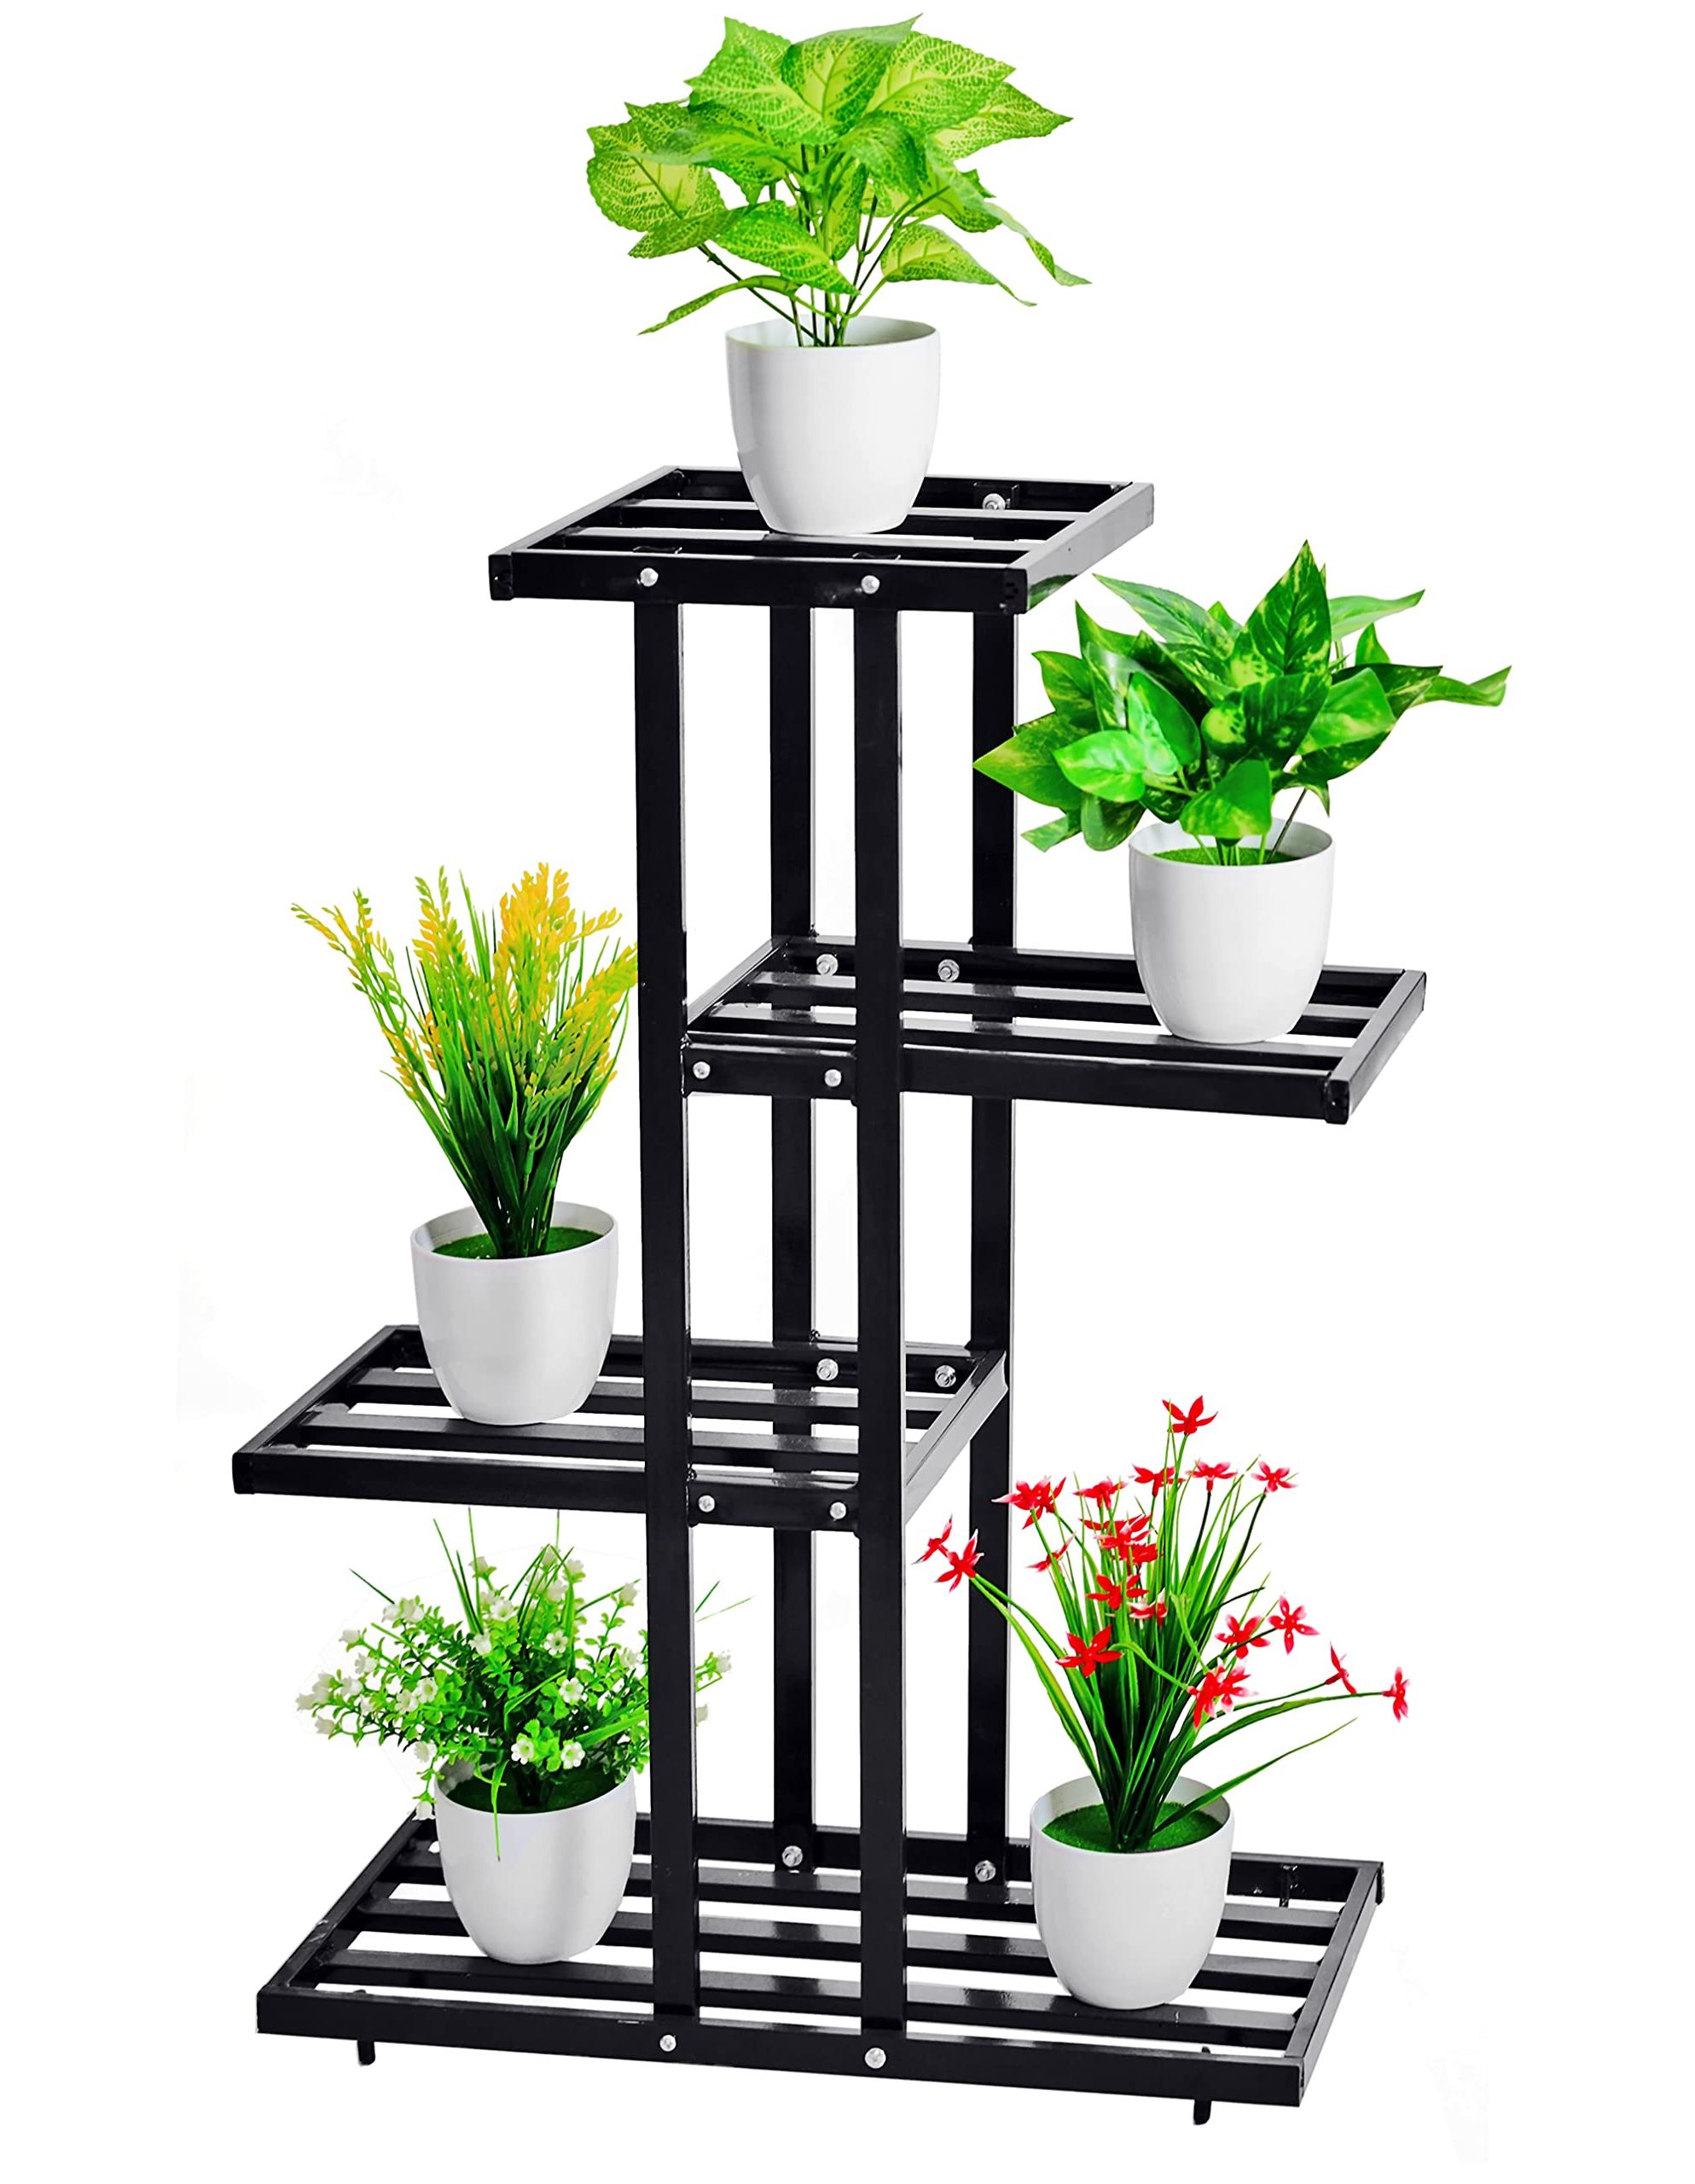 Four Tier Metal Plant Stands For Widely Used Amazon: Yemuny 4 Tier Metal Plant Stand Shelf 5 Potted, Flower Pot  Holder Planter Rack Organizer Multiple Tall Indoor Outdoor For Patio  Balcony Home Office Garden Living Room (black) : Patio, Lawn (View 3 of 10)